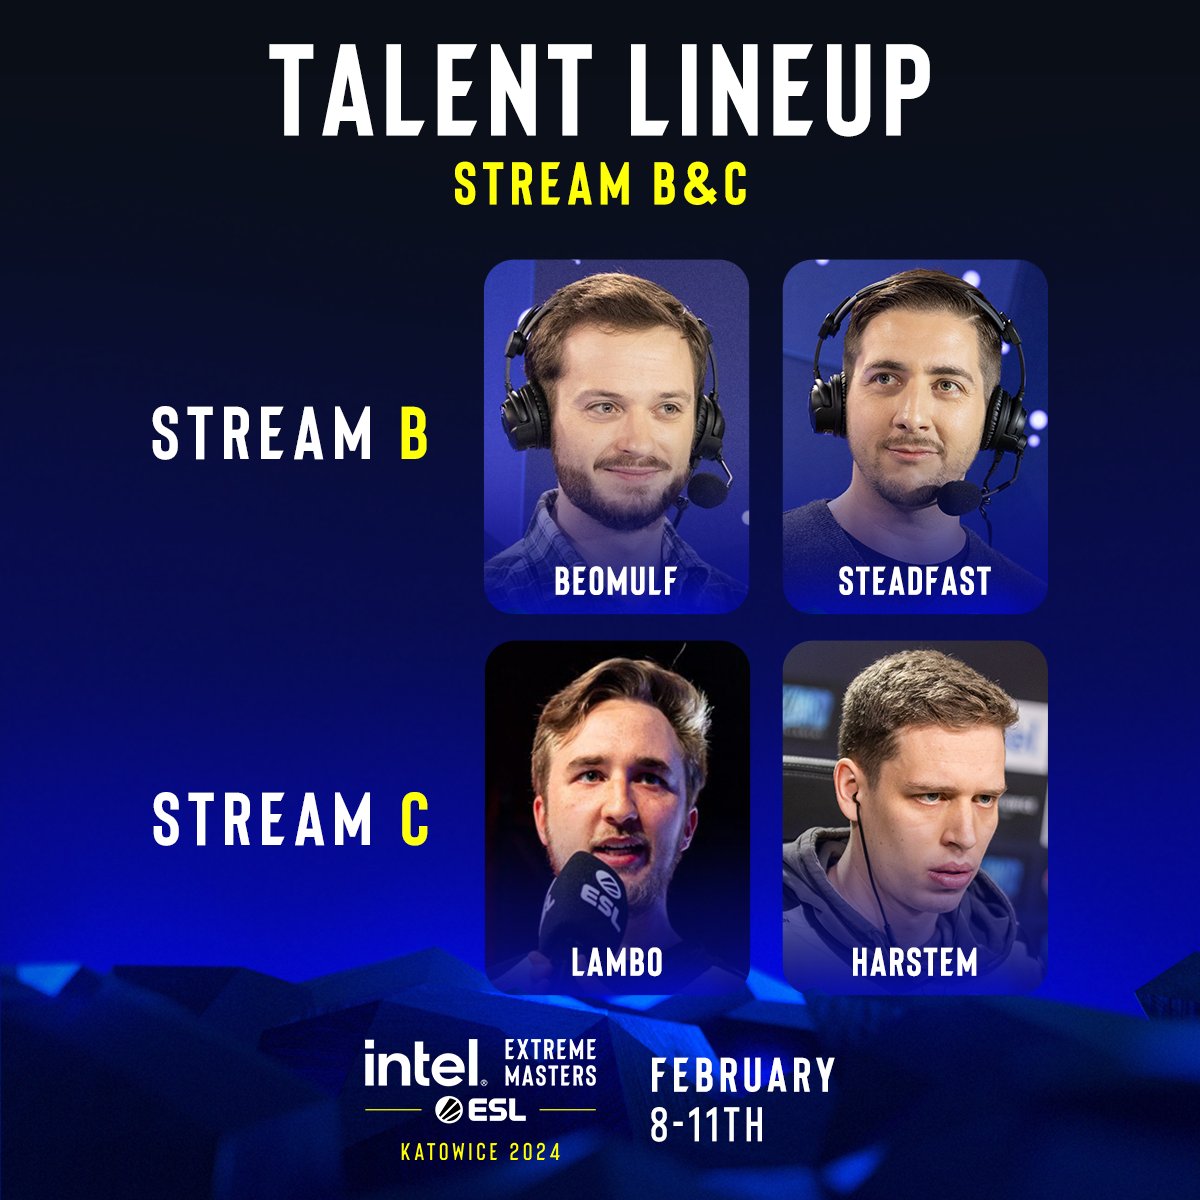 Time to dust that third monitor you've had lying around in your basement - meet your B & C stream talent for @IEM SC2 Katowice 2024! #ESLProTour #IEM